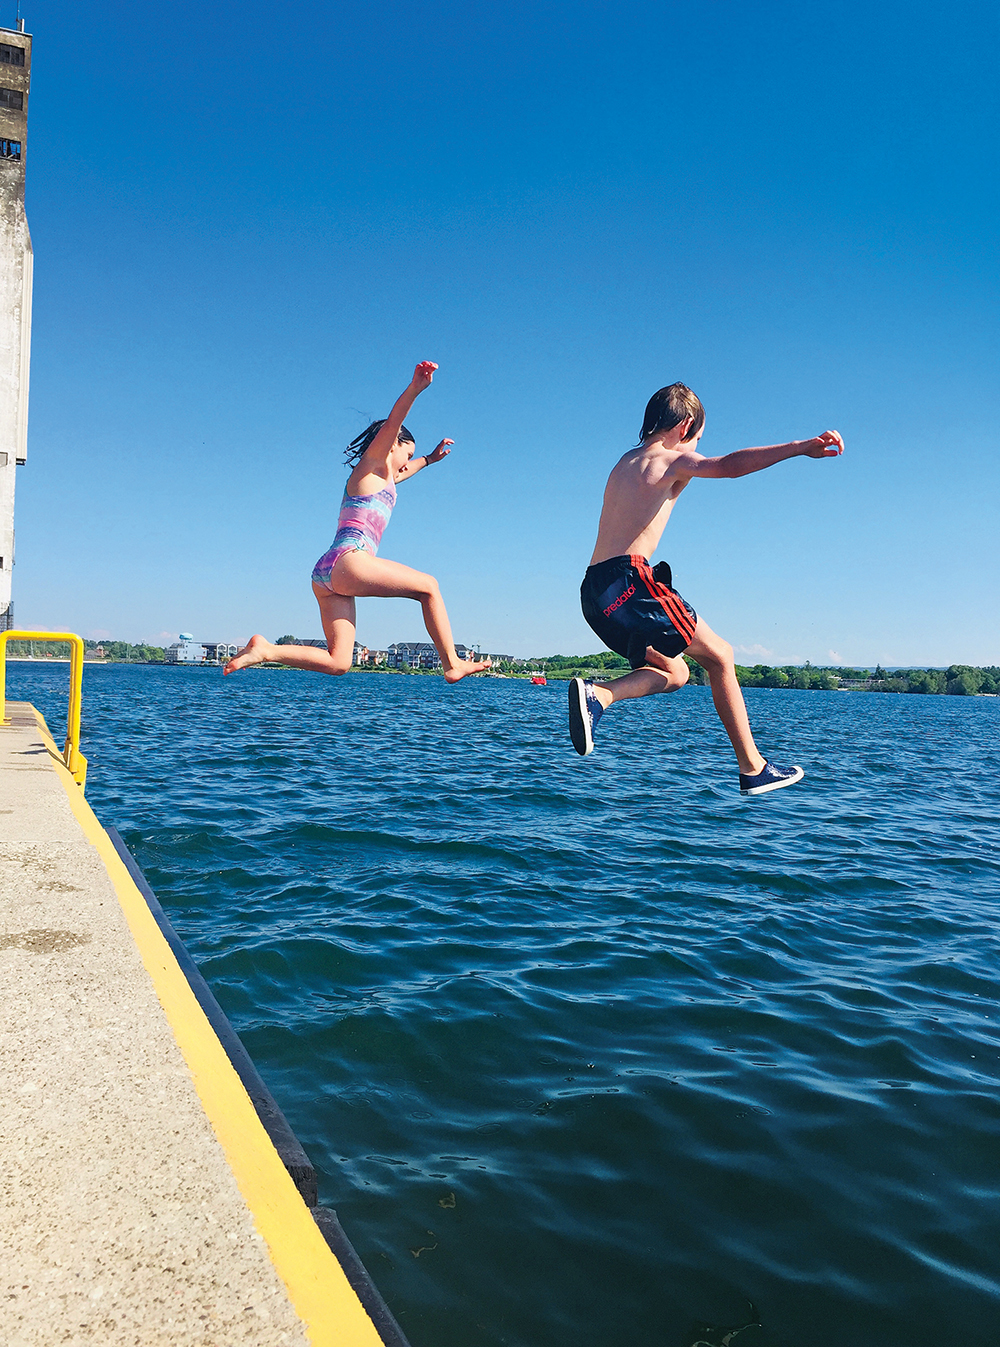 Ayla Zavitz and Hugo Meiche enjoying the rites of summer at Collingwood Harbour.